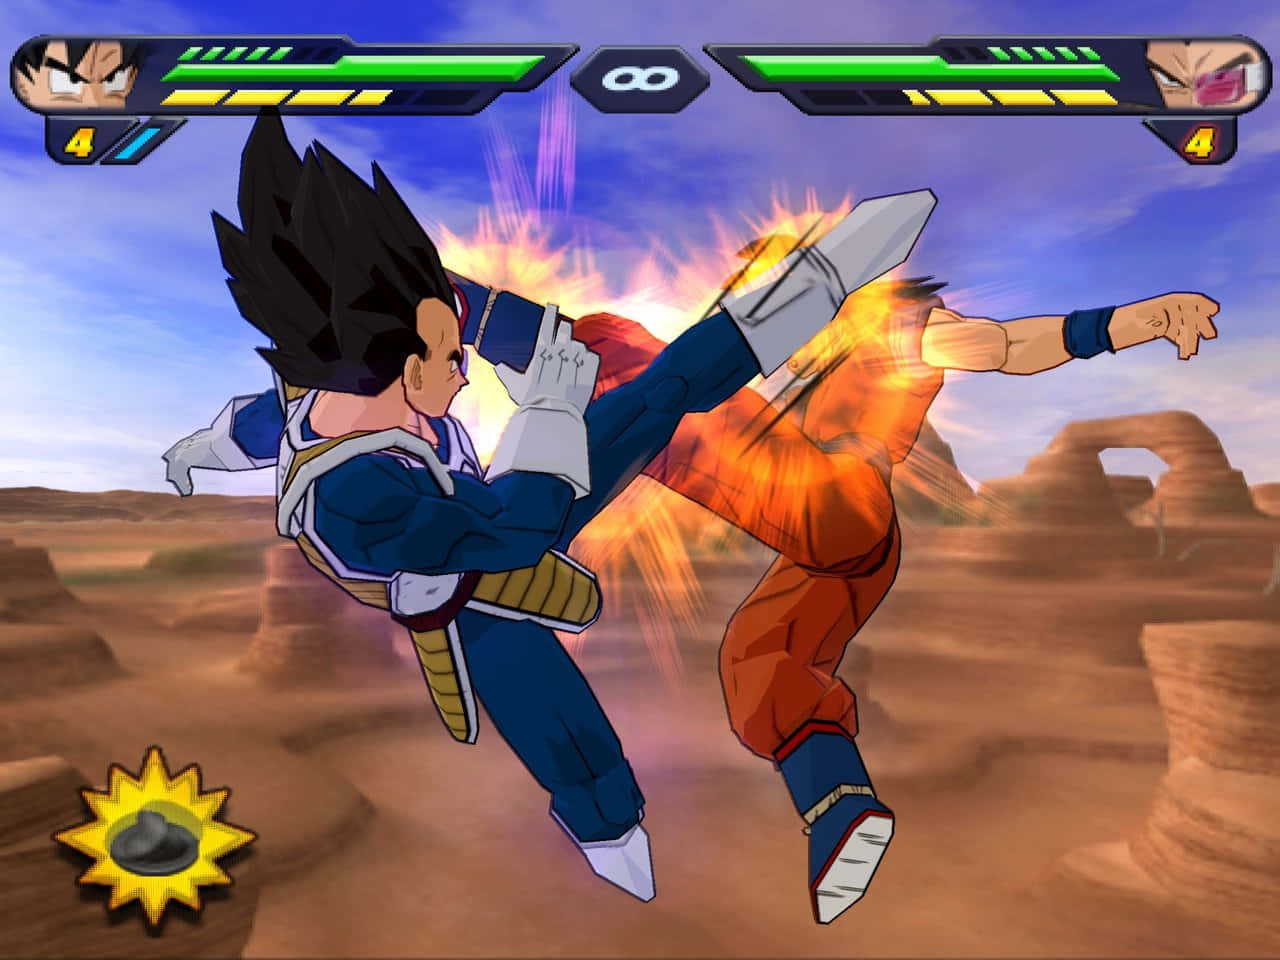 Prepare to fight like GoKU with DRAGON BALL Z GAMES Wallpaper